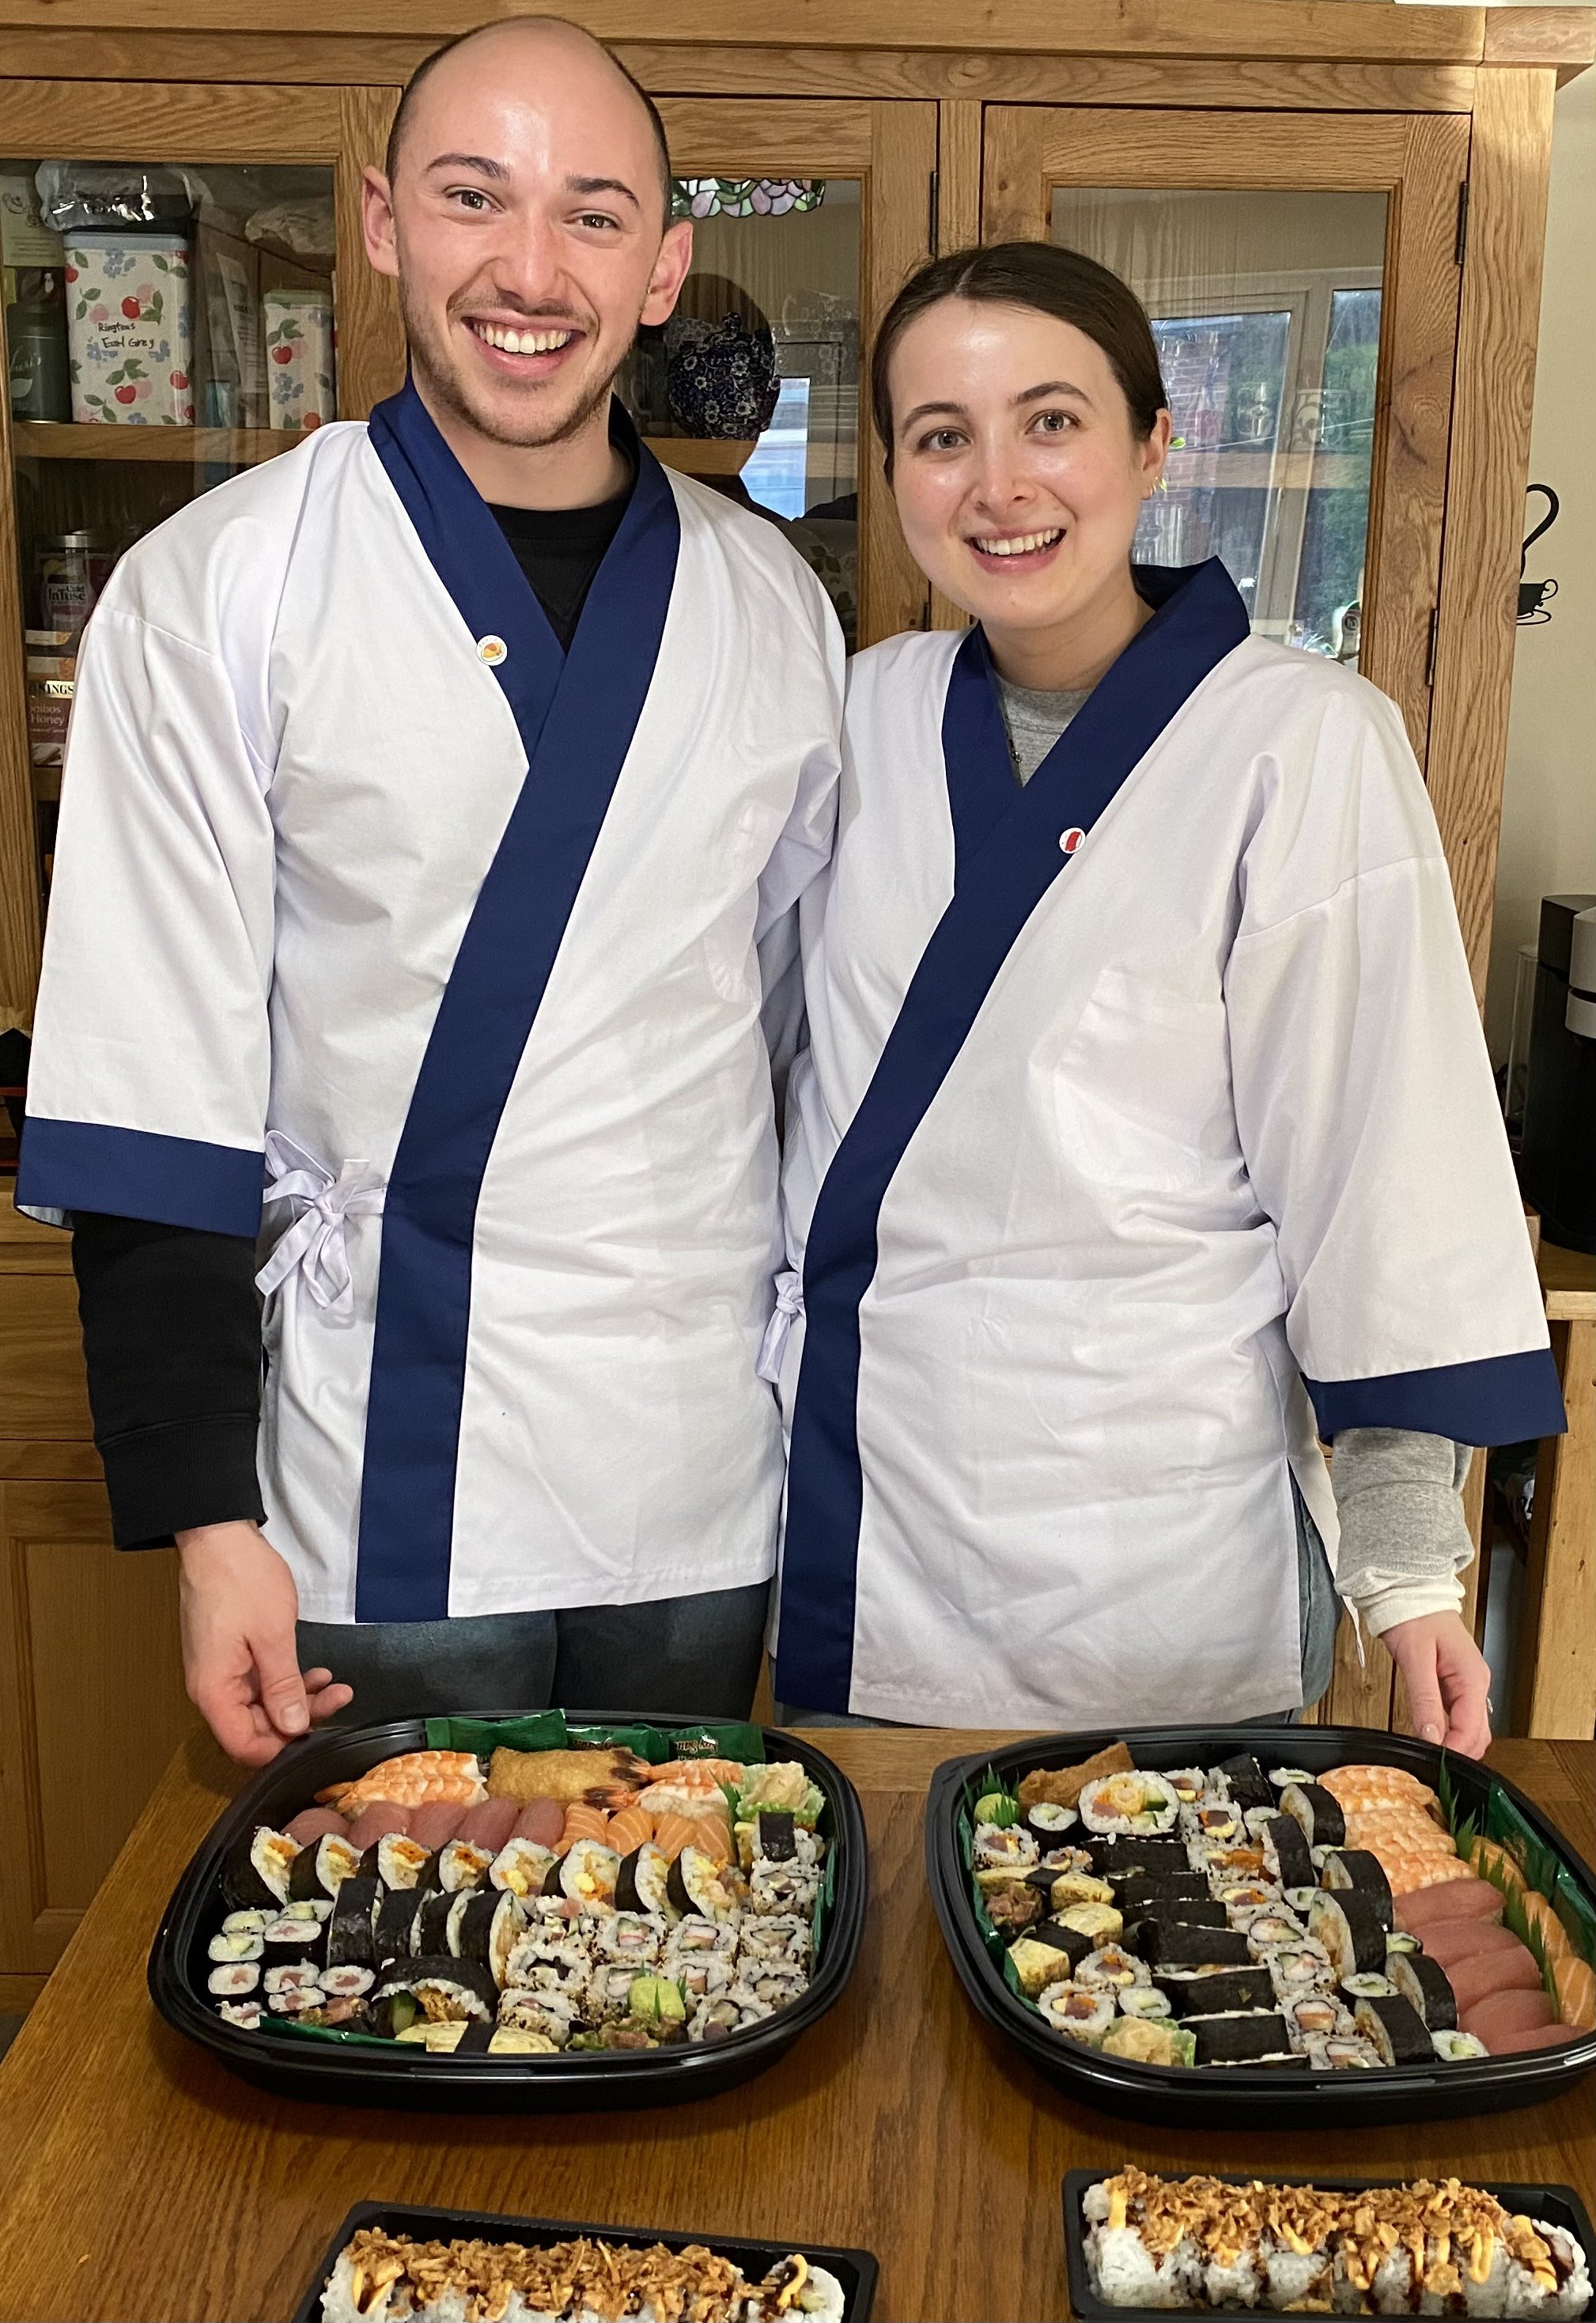 What Makes an Outstanding Sushi Chef?